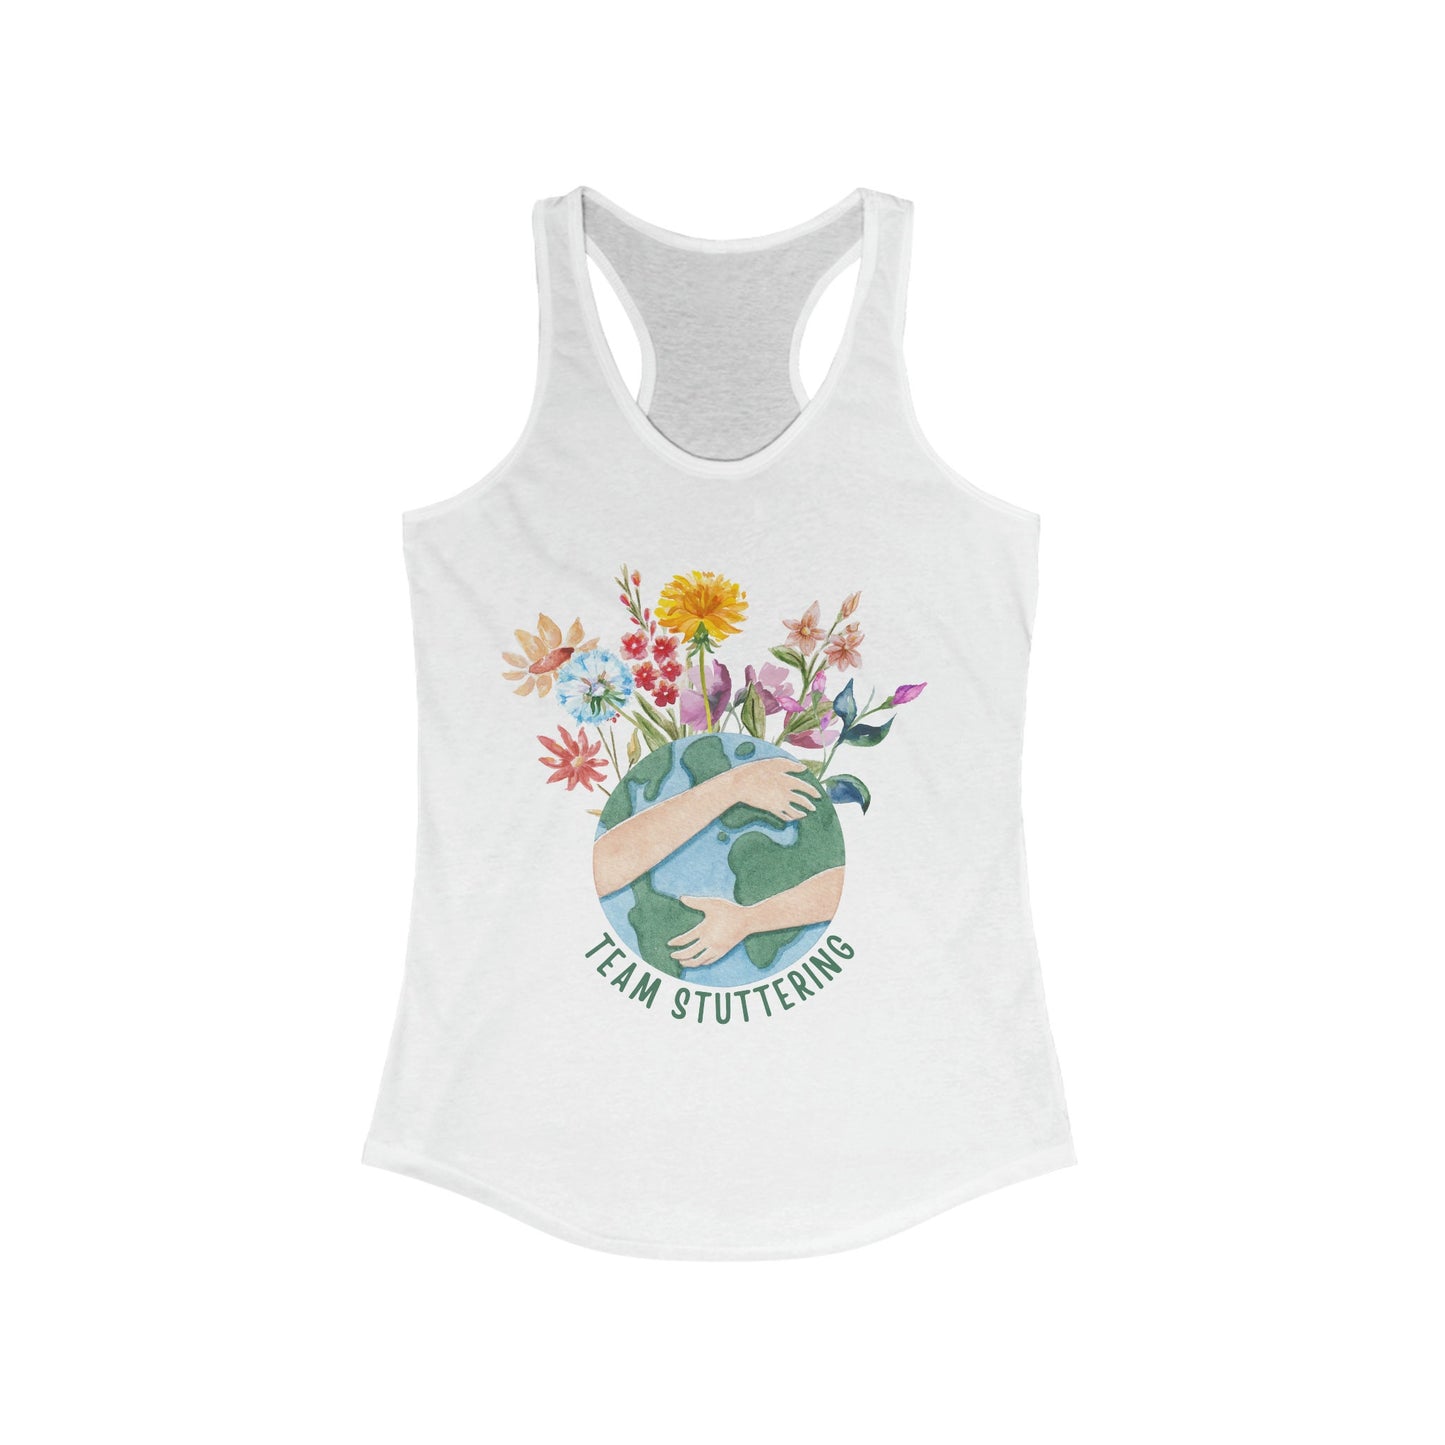 Women's tank top, Team Stuttering, Racerback Tank, Earth and flowers tank, Normalize Stuttering, Gift for woman who stutters